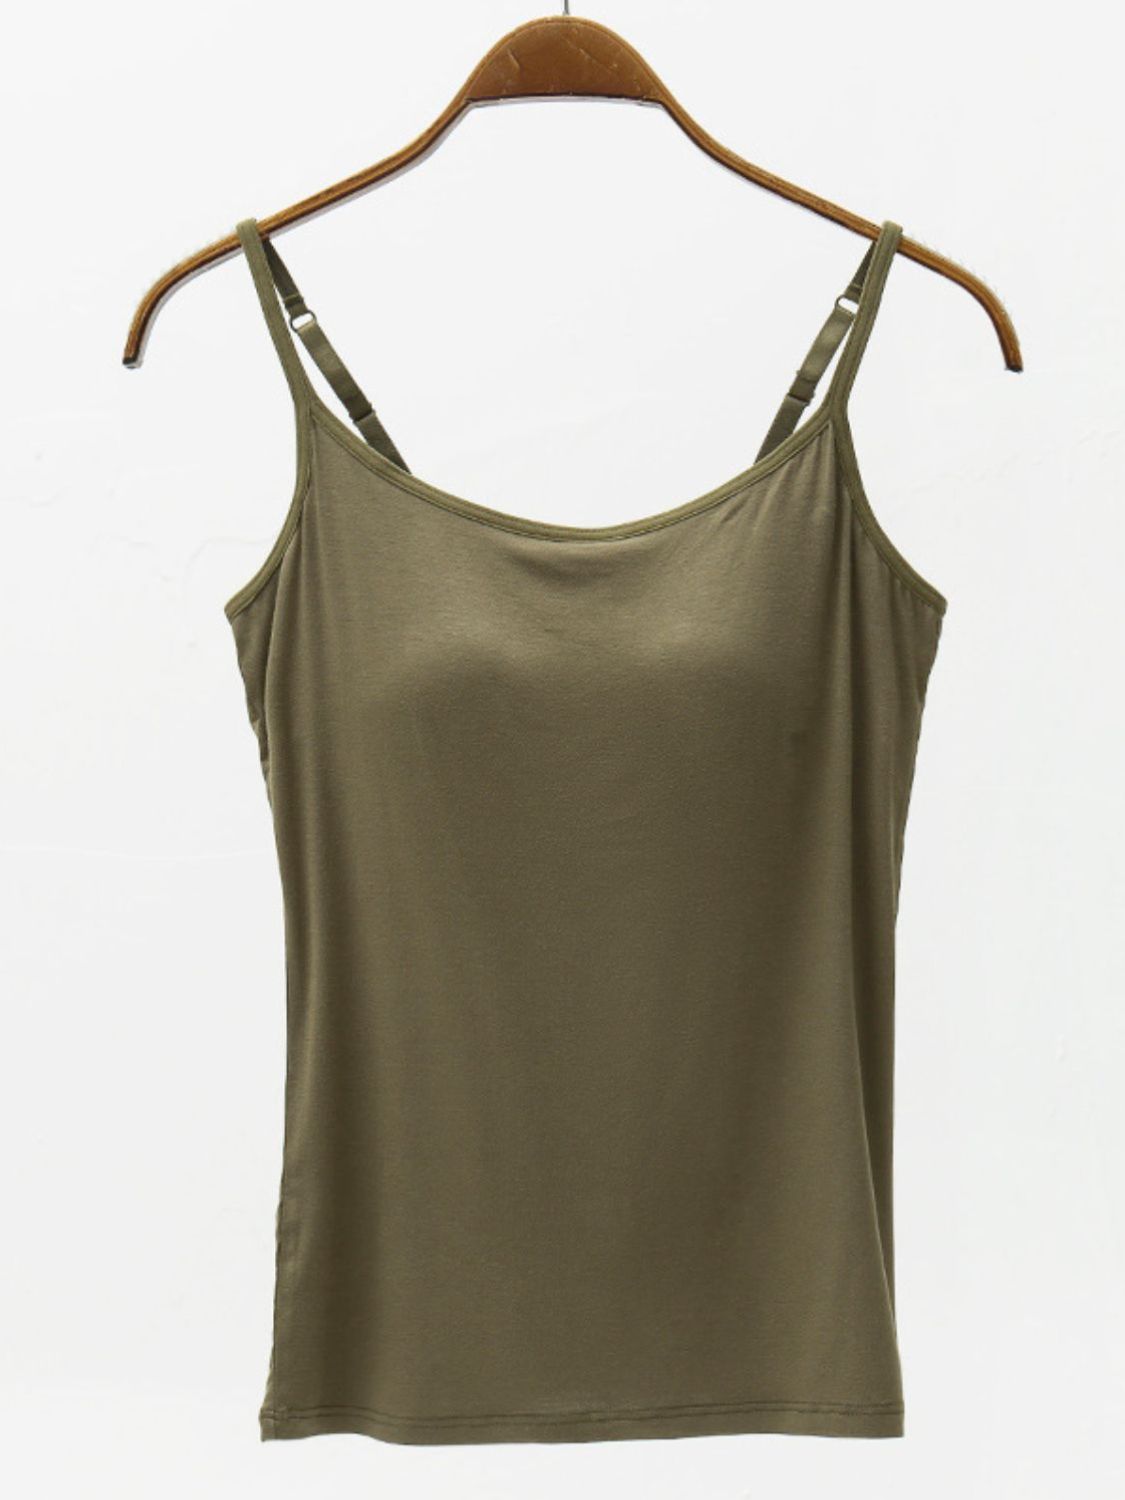 Dark Olive Green Full Size Adjustable Strap Modal Cami with Bra Sentient Beauty Fashions Apaparel &amp; Accessories